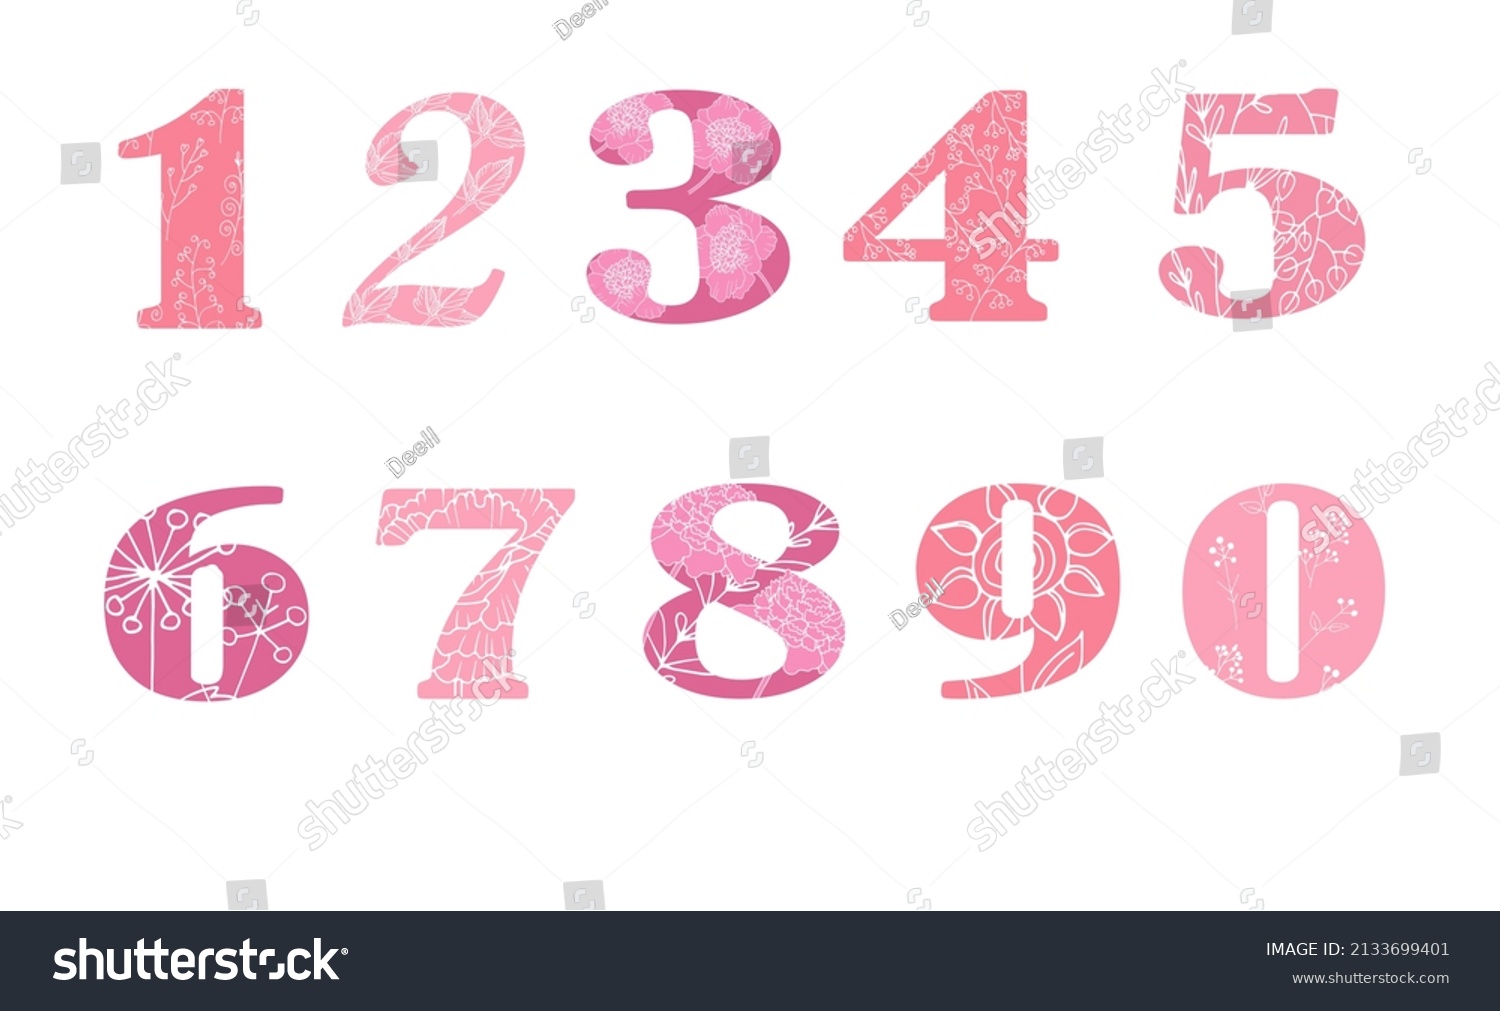 vector-clipart-set-numbers-boho-style-stock-vector-royalty-free